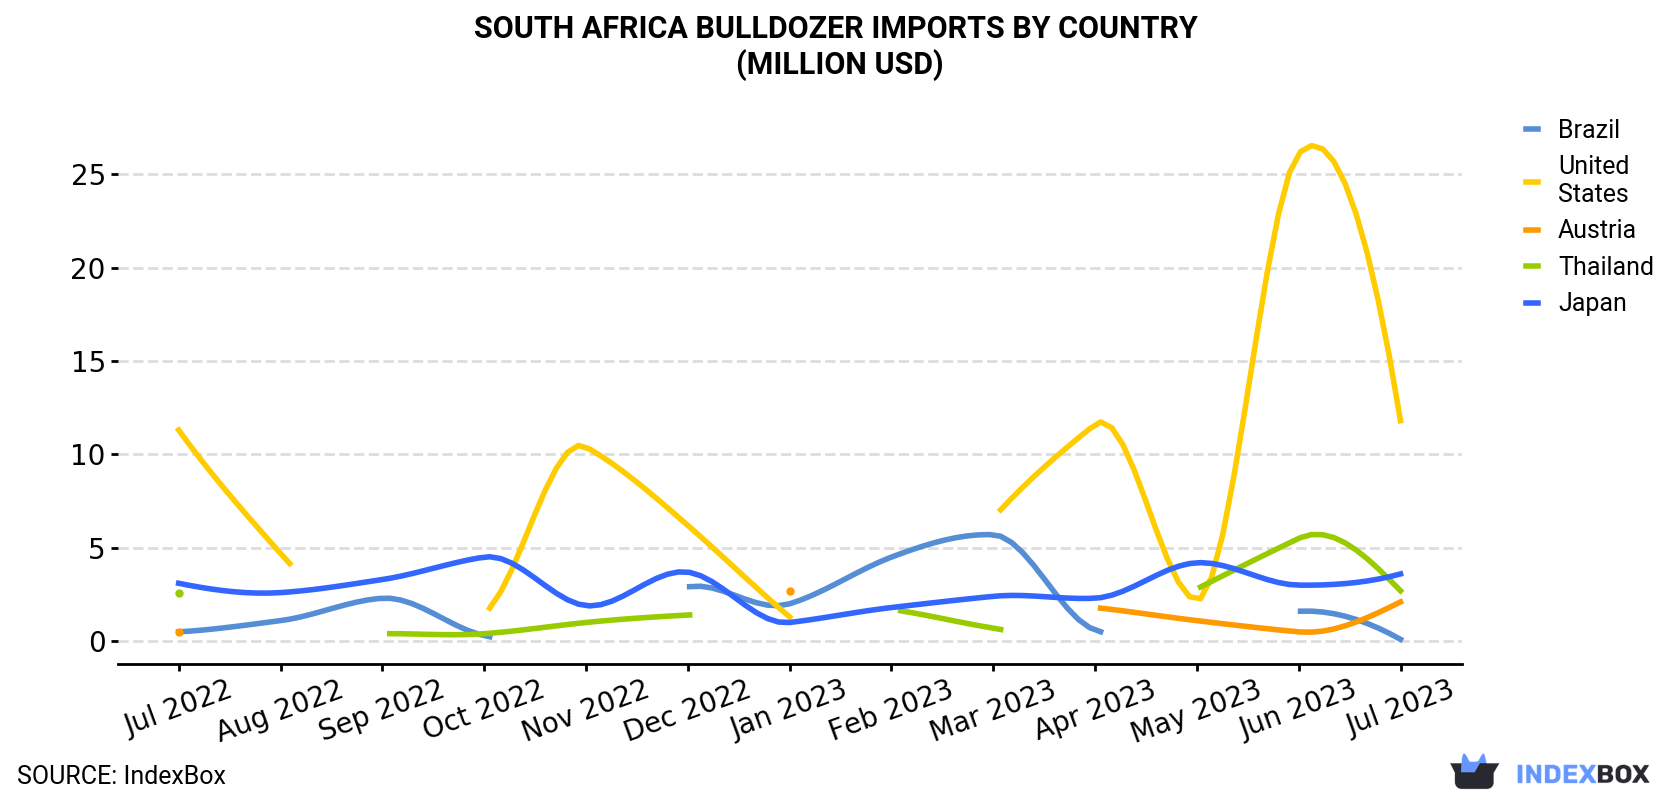 South Africa Bulldozer Imports By Country (Million USD)